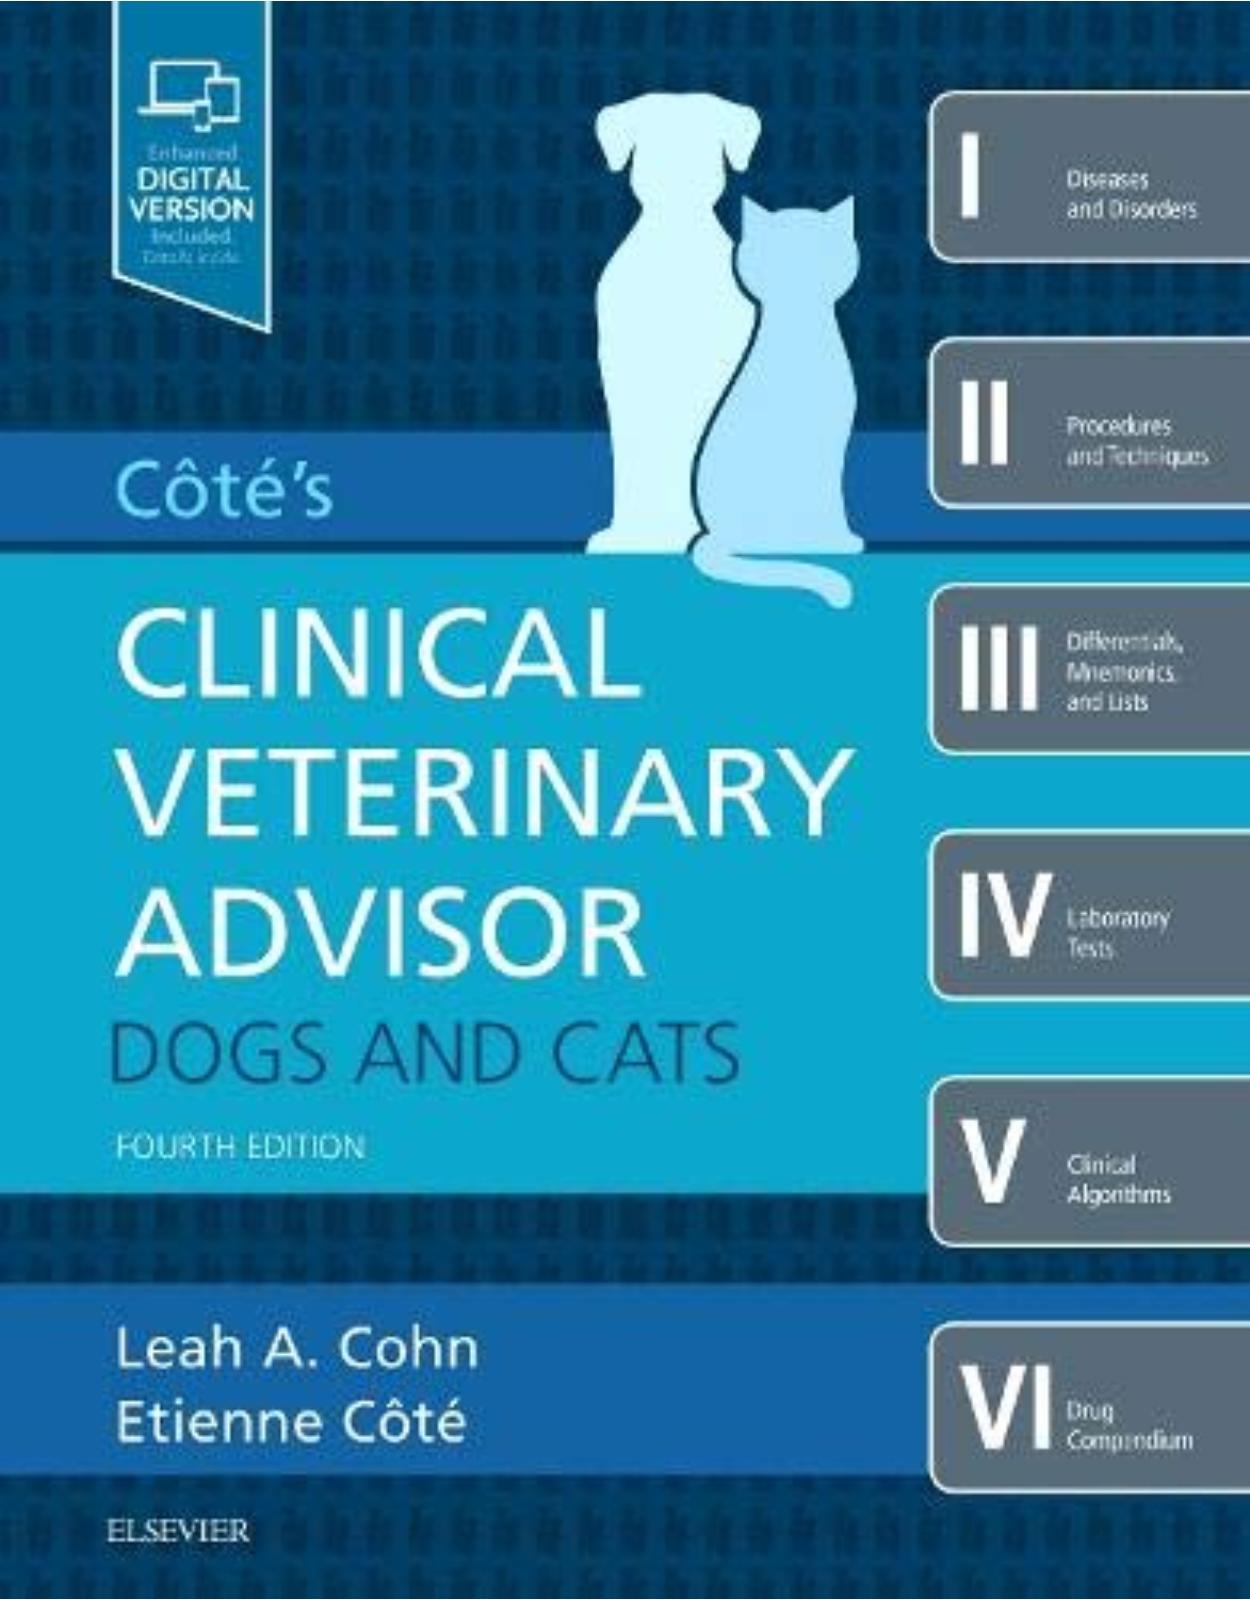 Cote’s Clinical Veterinary Advisor: Dogs and Cats